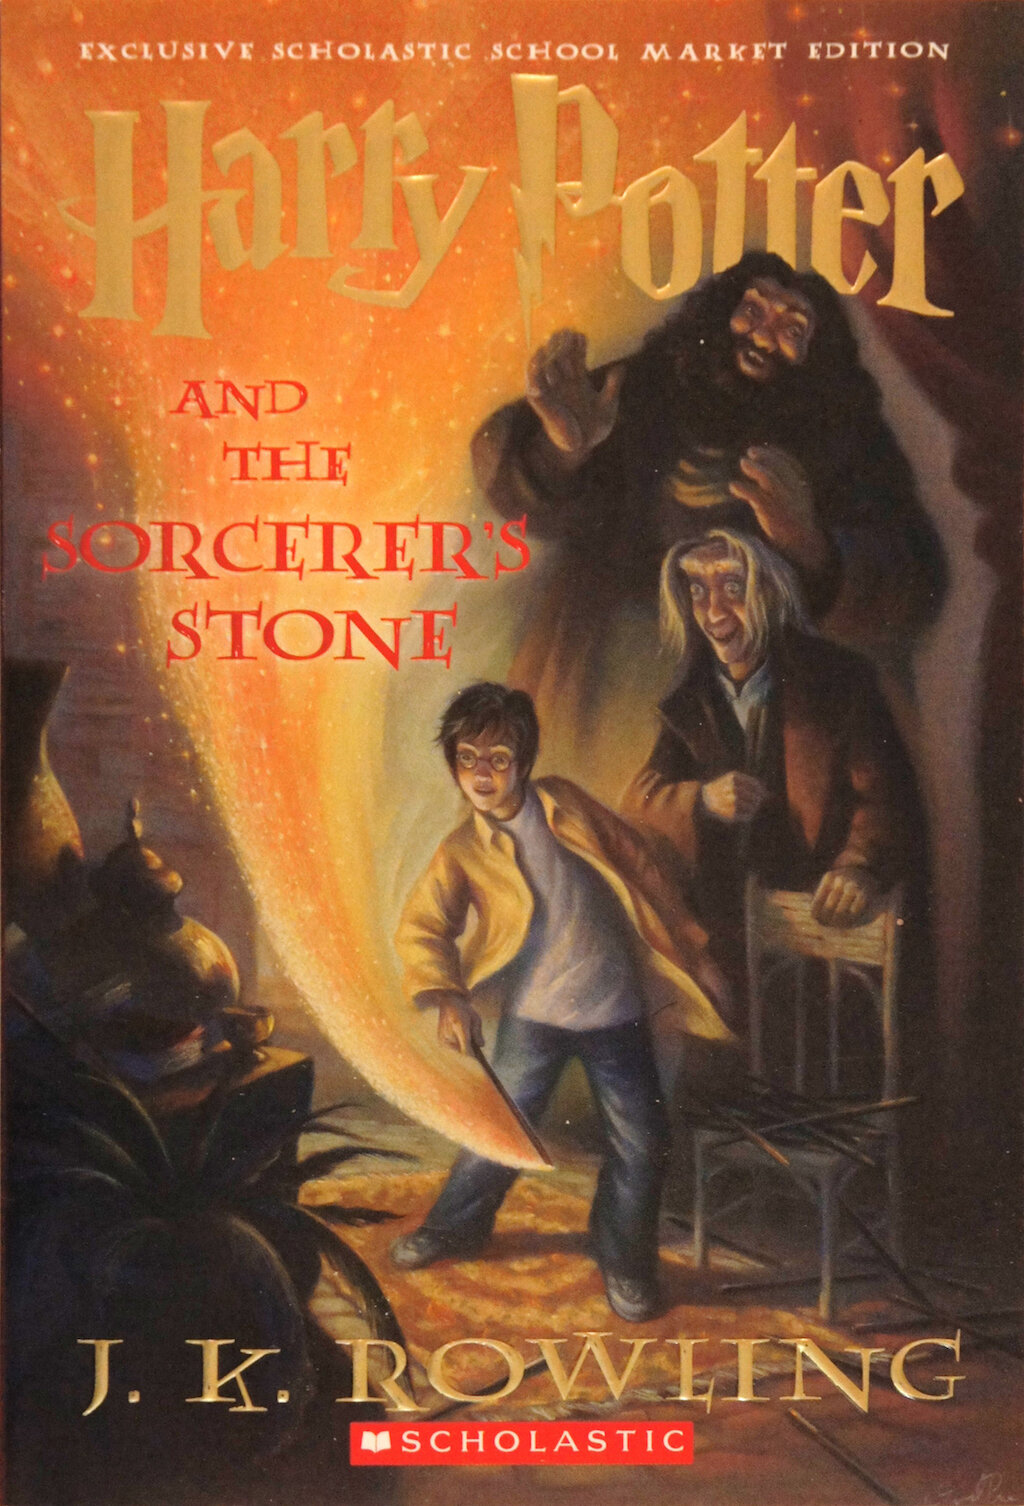 harry potter and philosopher's stone book cover